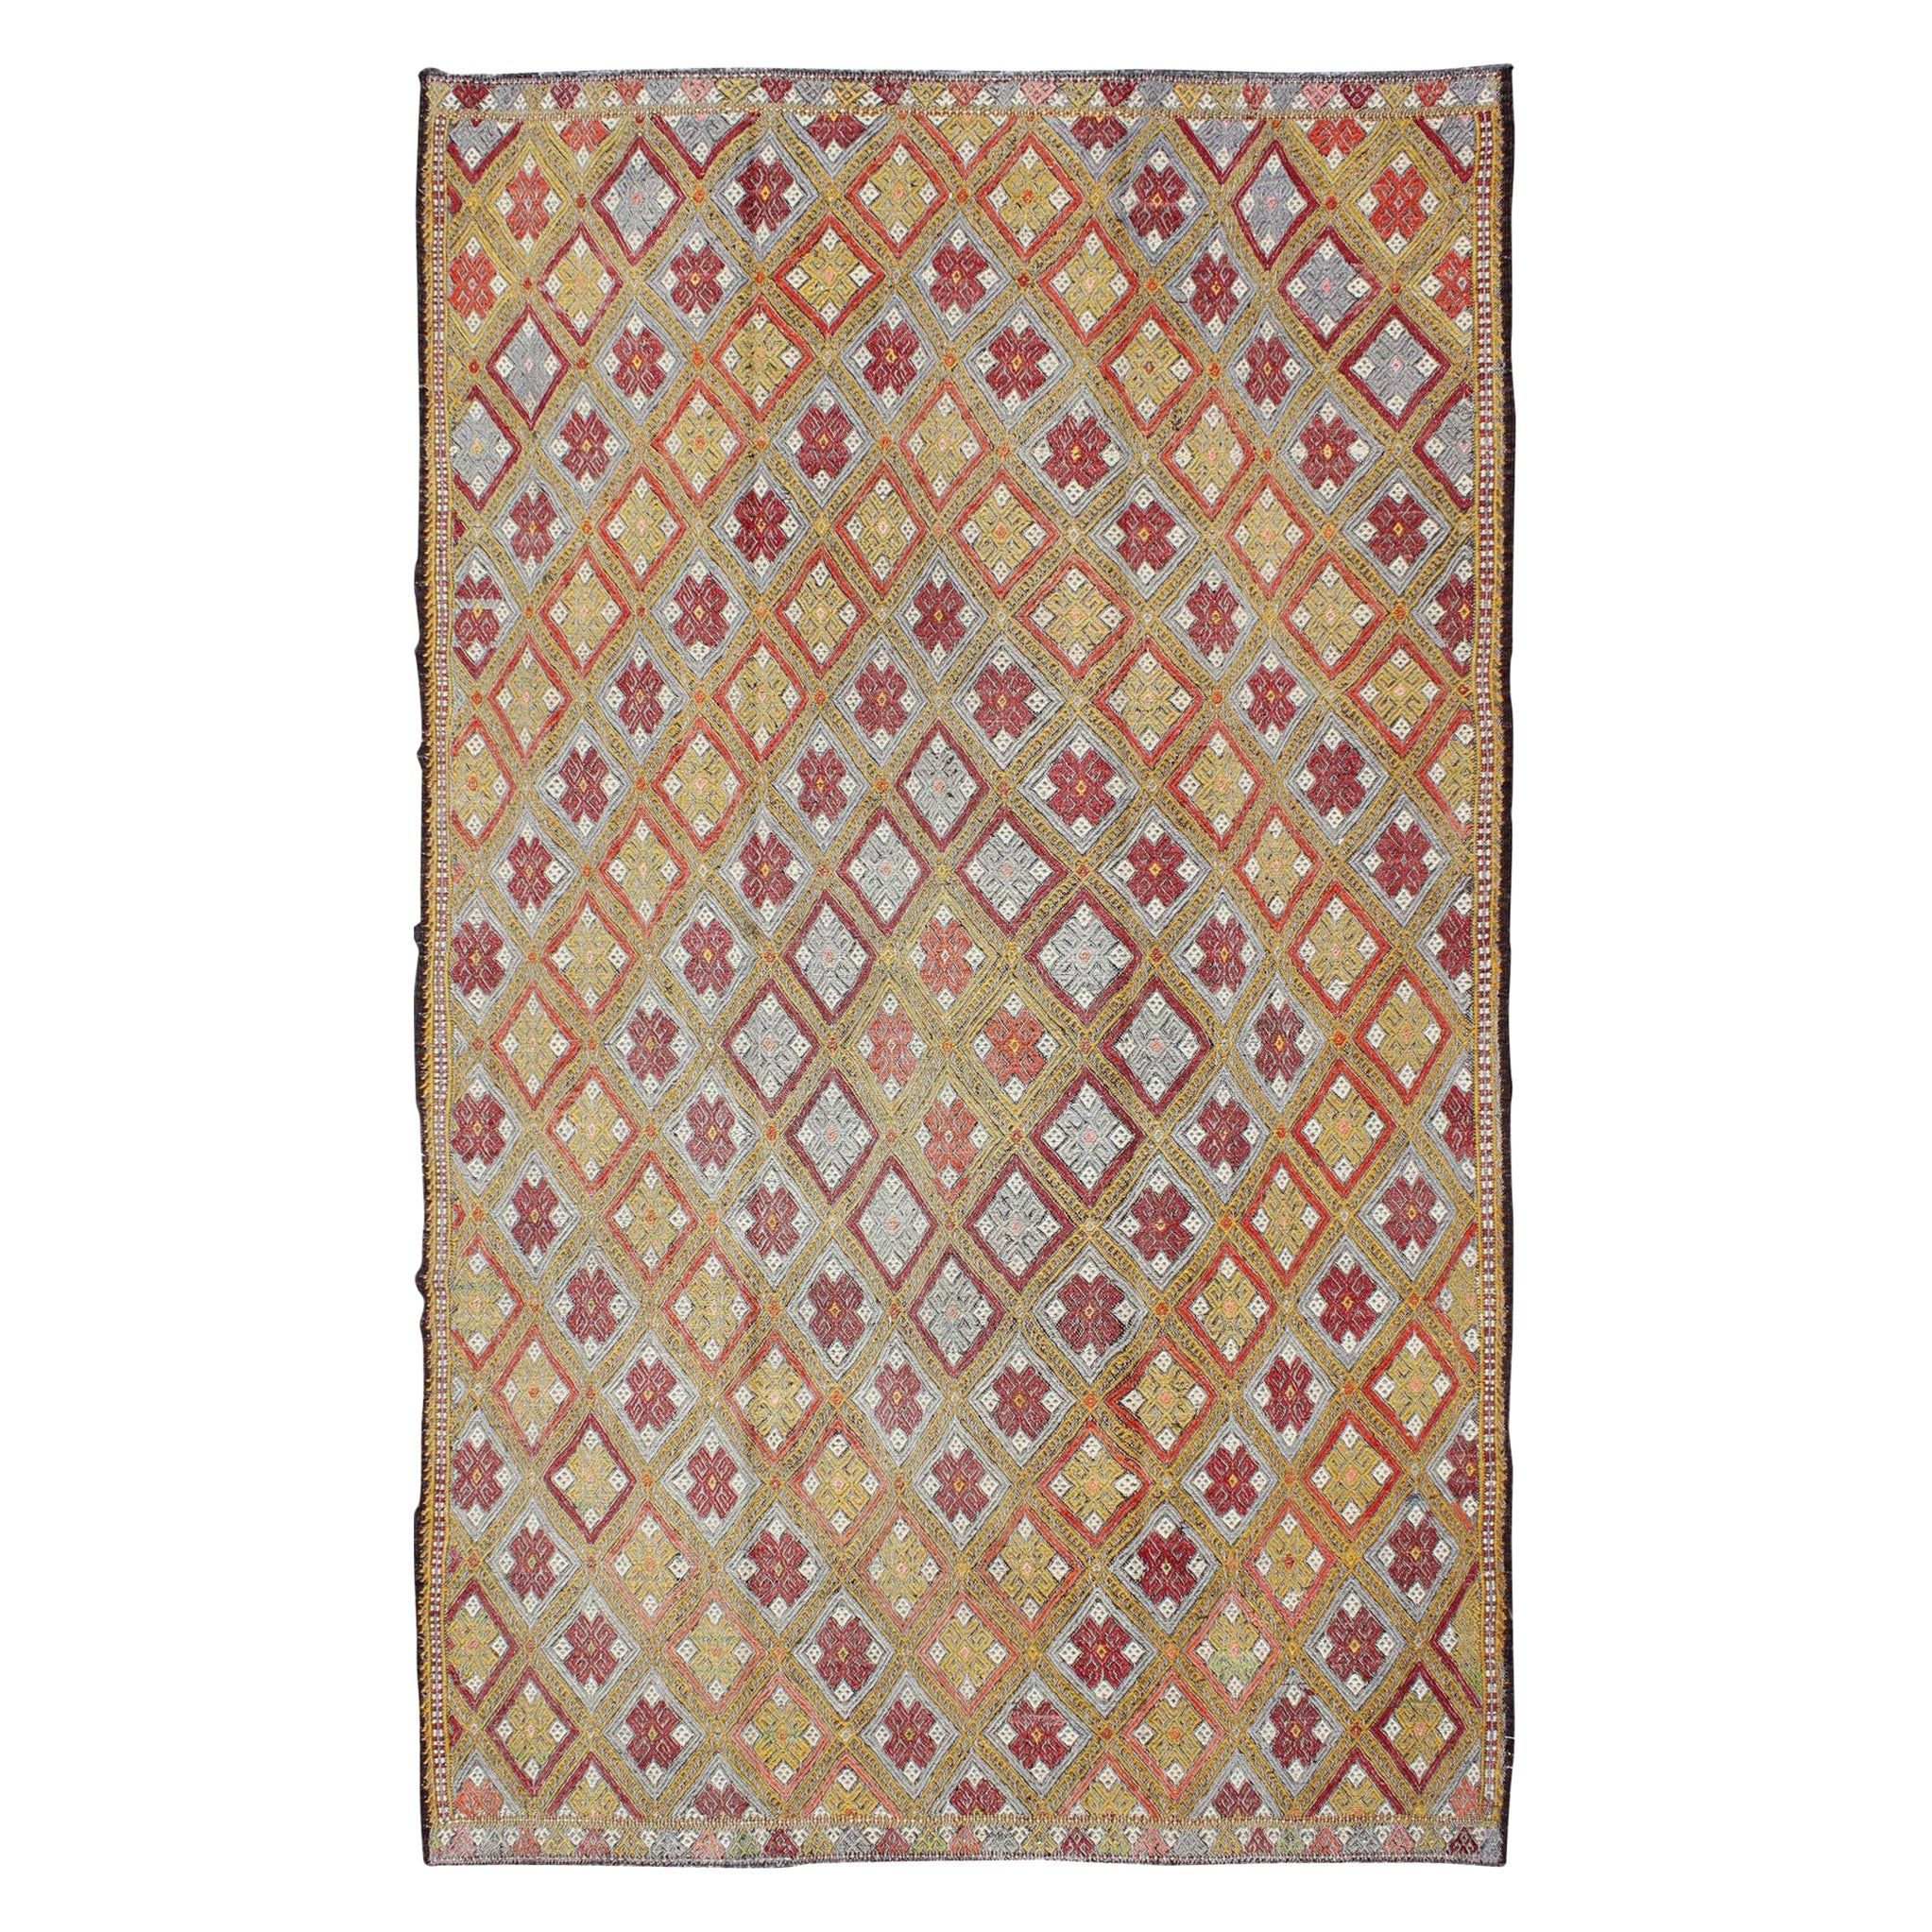 Colorful Vintage Turkish Flat-Weave Embroidered Kilim with Diamond Design For Sale